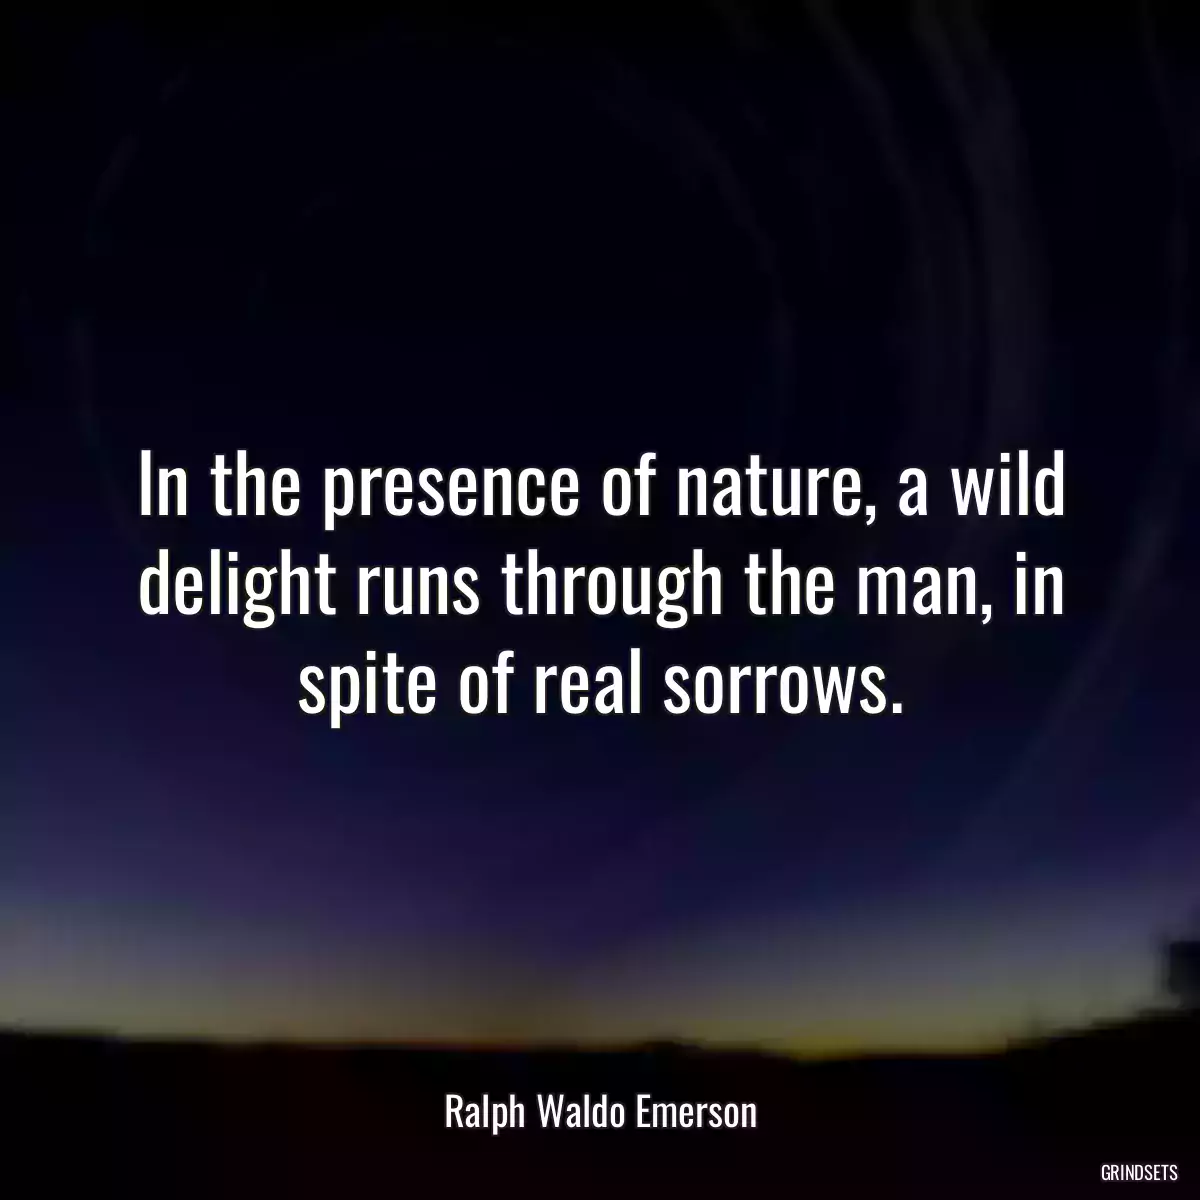 In the presence of nature, a wild delight runs through the man, in spite of real sorrows.